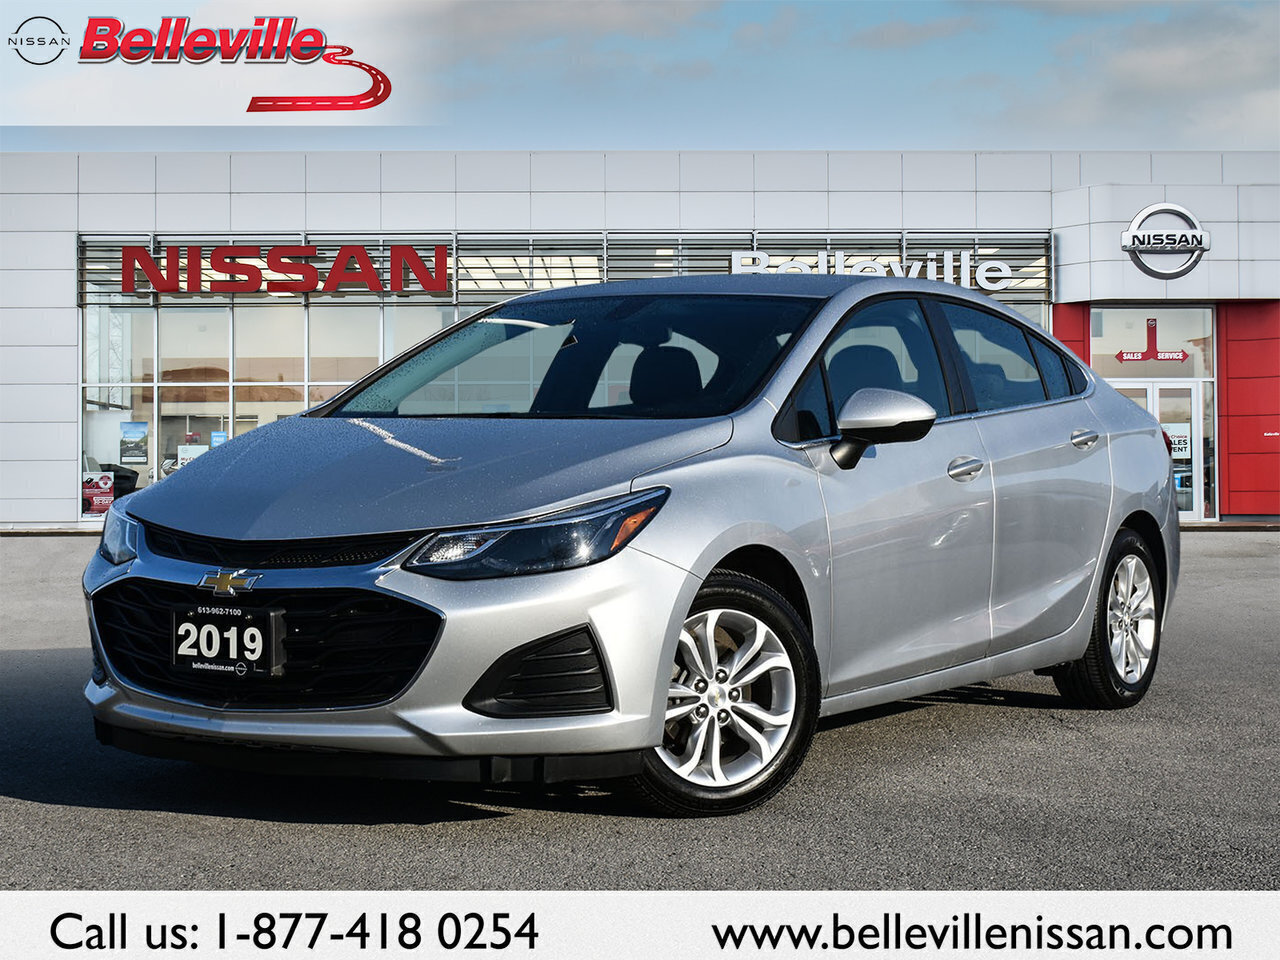 2019 Chevrolet Cruze LT Low Km's, local trade, clean carfax!